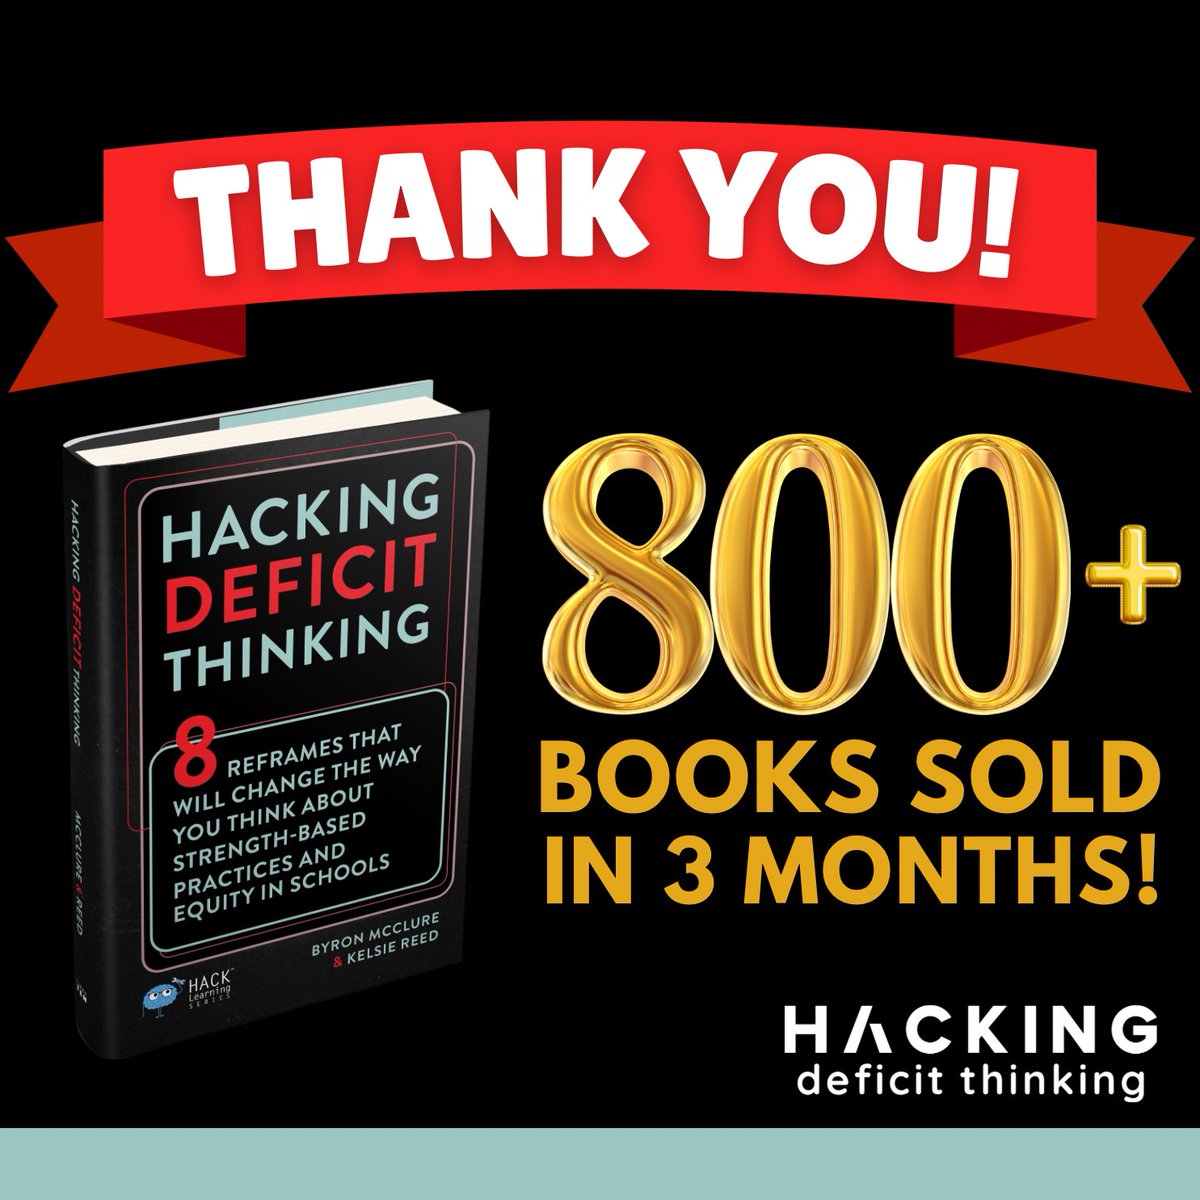 WOW!! We are so incredibly grateful! Thank you to every reader who has purchased a copy so far 🙏🏾🙏🏽 PS-If you haven’t already, PLEASE leave us a rating and review on Amazon. It helps spread our message more than you think!
#hackingdeficits #strengthbased #educationequity